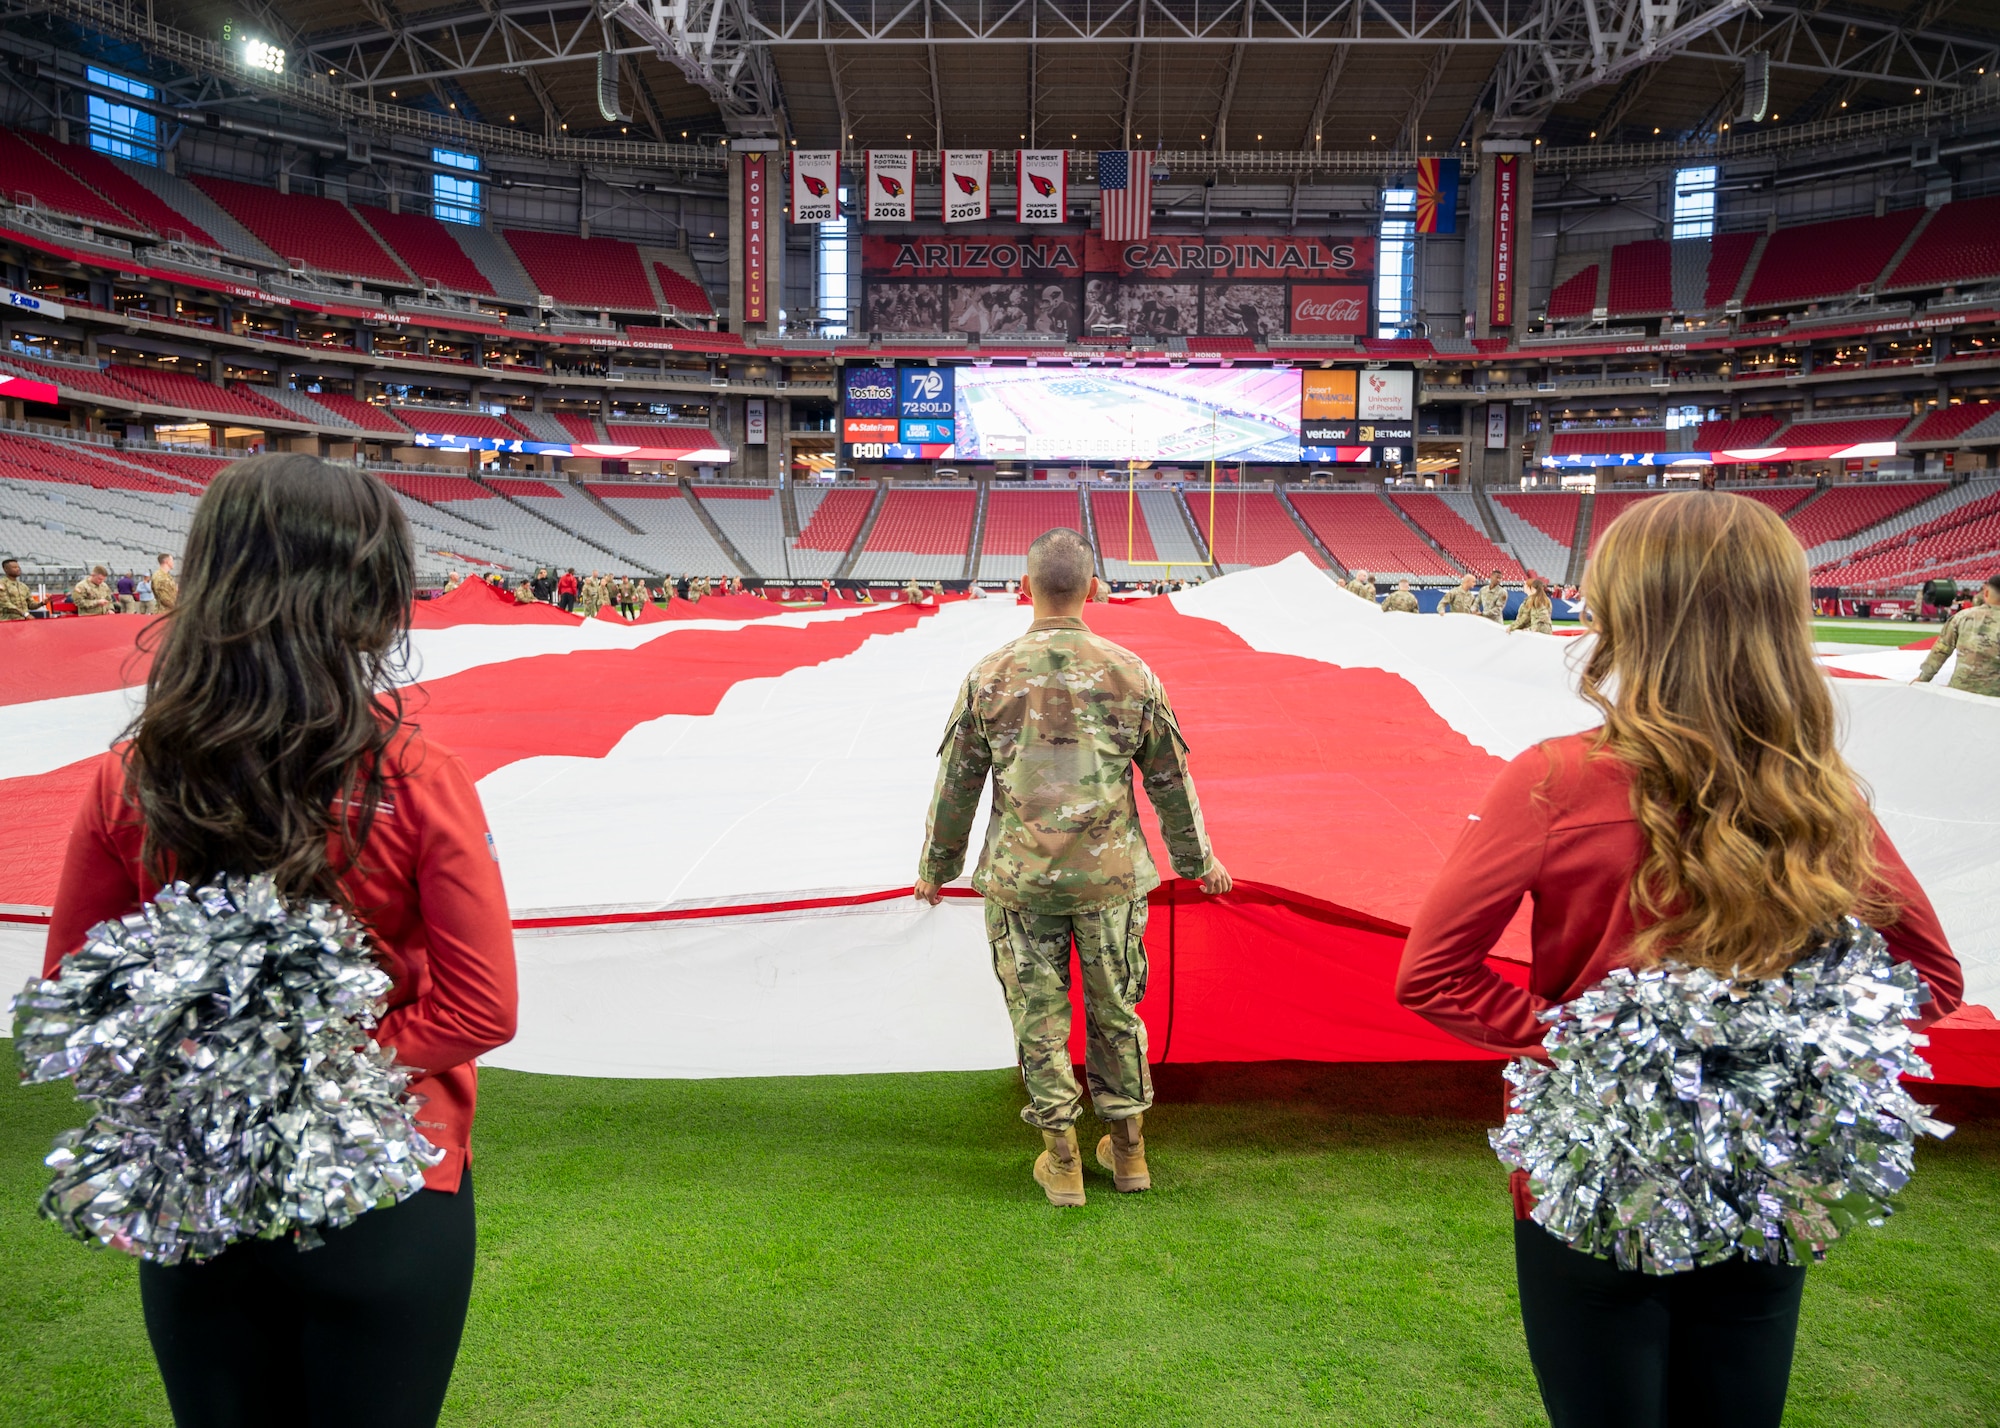 U.S. Air Force Airmen assigned to the 56th Fighter Wing, U.S. Army Soldiers from the Phoenix Recruiting Battalion, U.S. Marines and the Arizona Cardinals Cheerleaders practice unfurling the U.S. flag for the Salute to Service event Nov. 6, 2022, at State Farm Stadium, Glendale, Arizona.